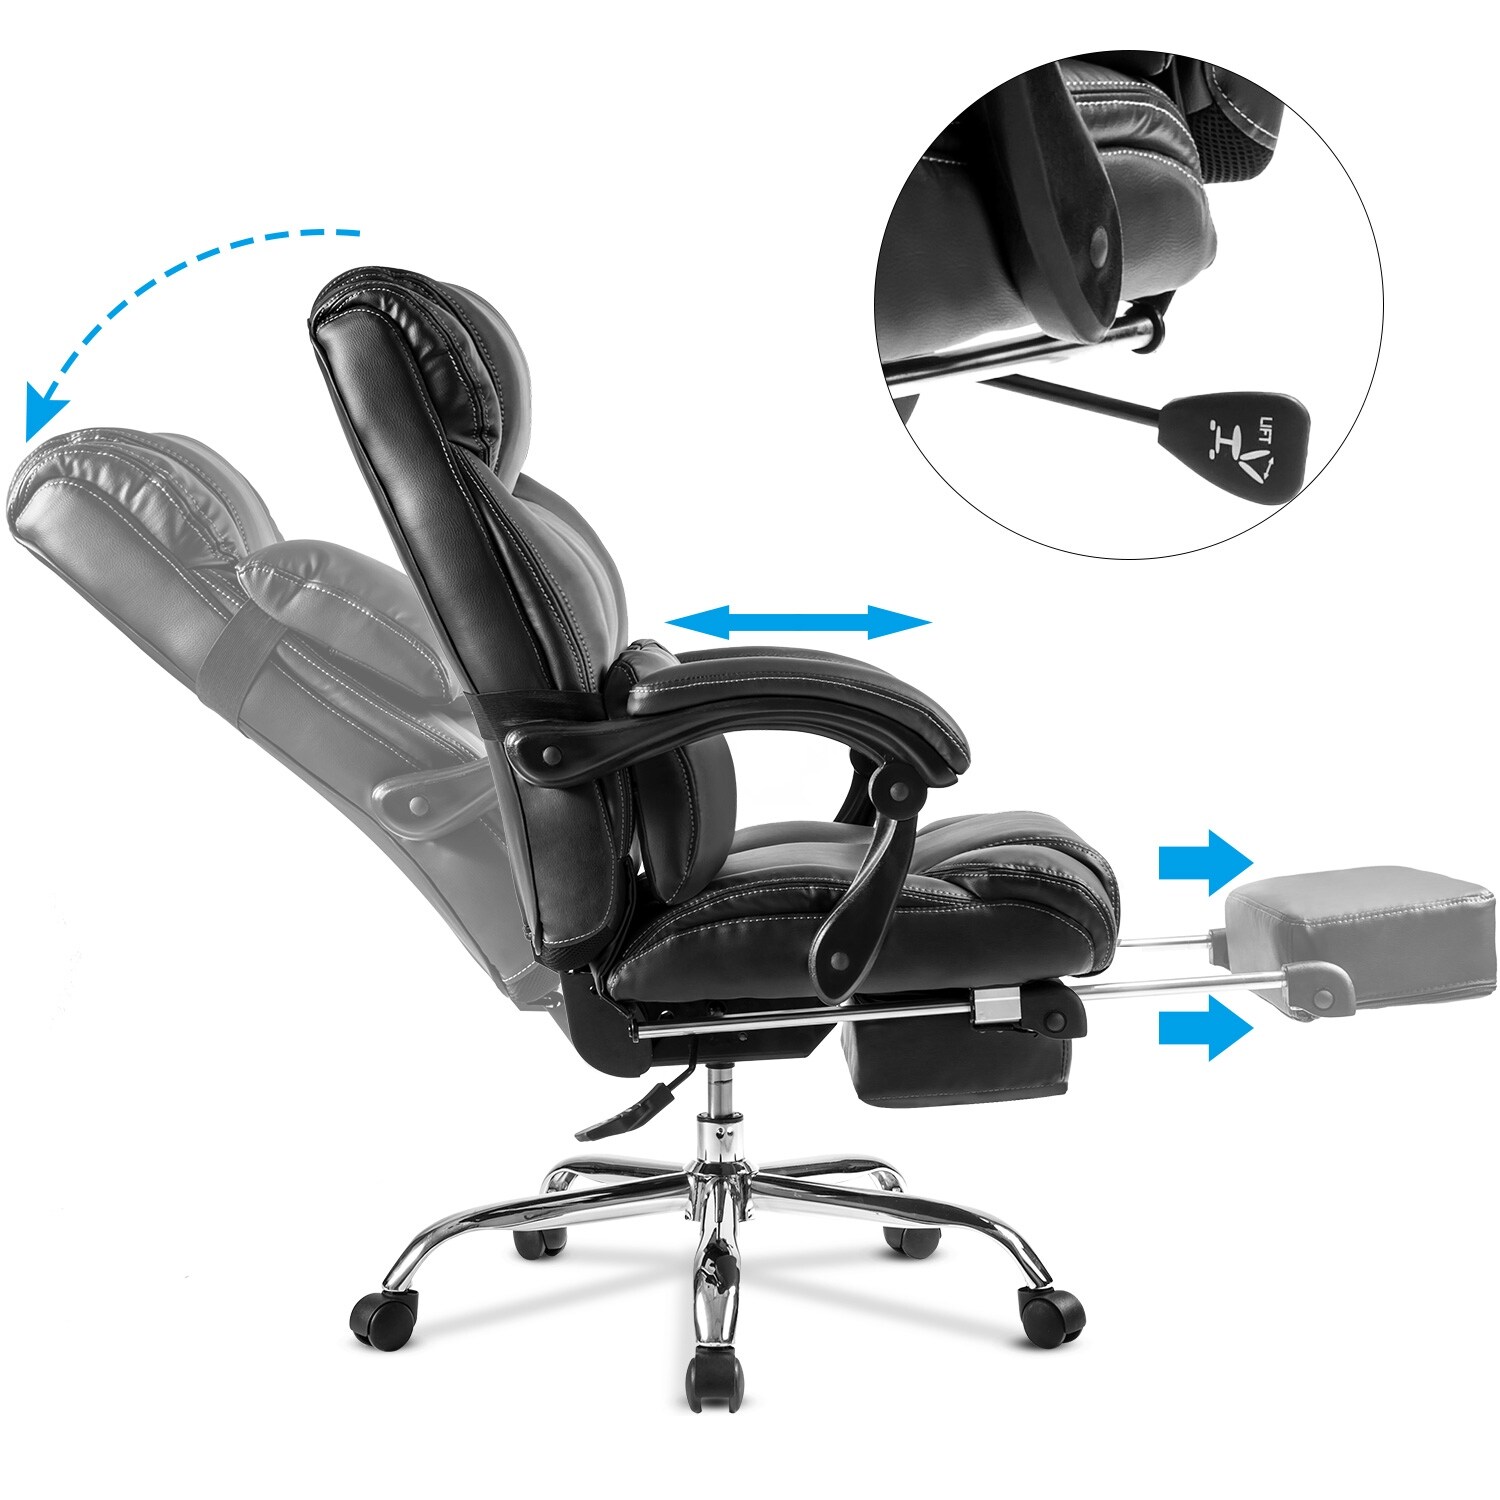 https://ak1.ostkcdn.com/images/products/is/images/direct/a5d14bb871b0f51430a4fd084006beaeb05f0602/EYIW-Adjustable-Height-Double-Padded-Office-Chair-%2C-Adjustable-Back-Swivel-Arm-Desk-Chair-with-Support-Cushion-and-Footrest.jpg